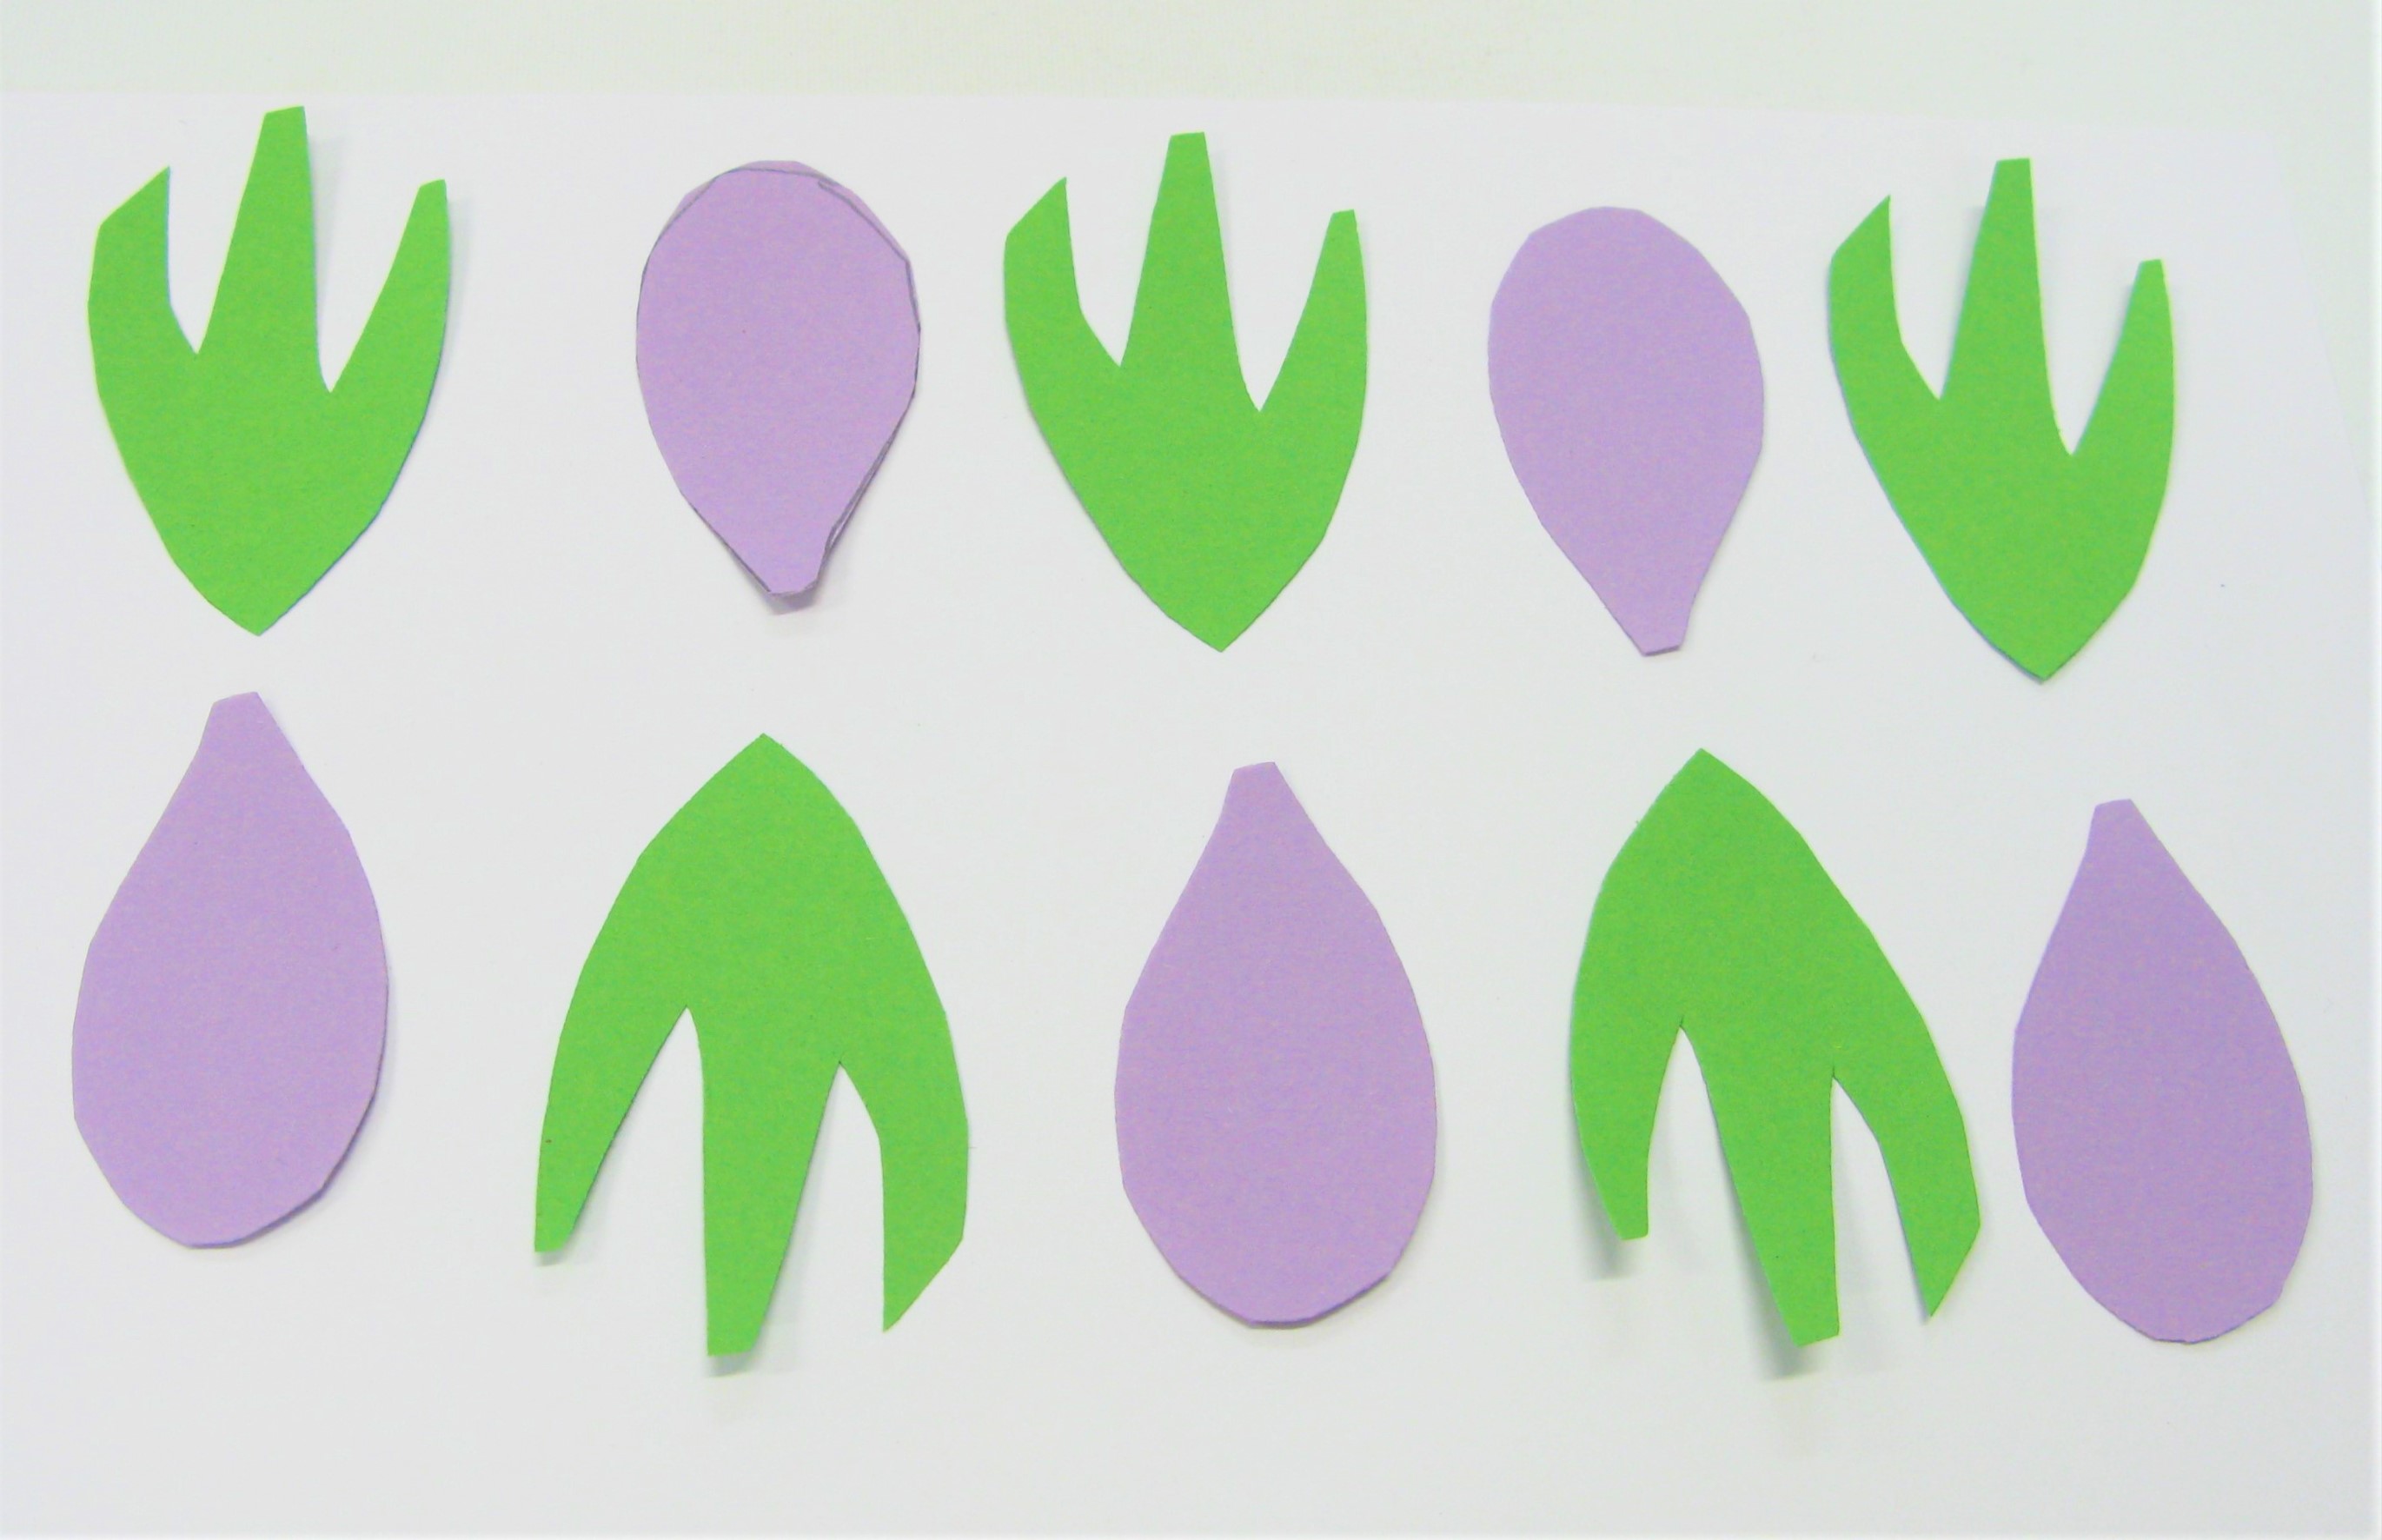 A pattern made from paper shapes inspired by plants